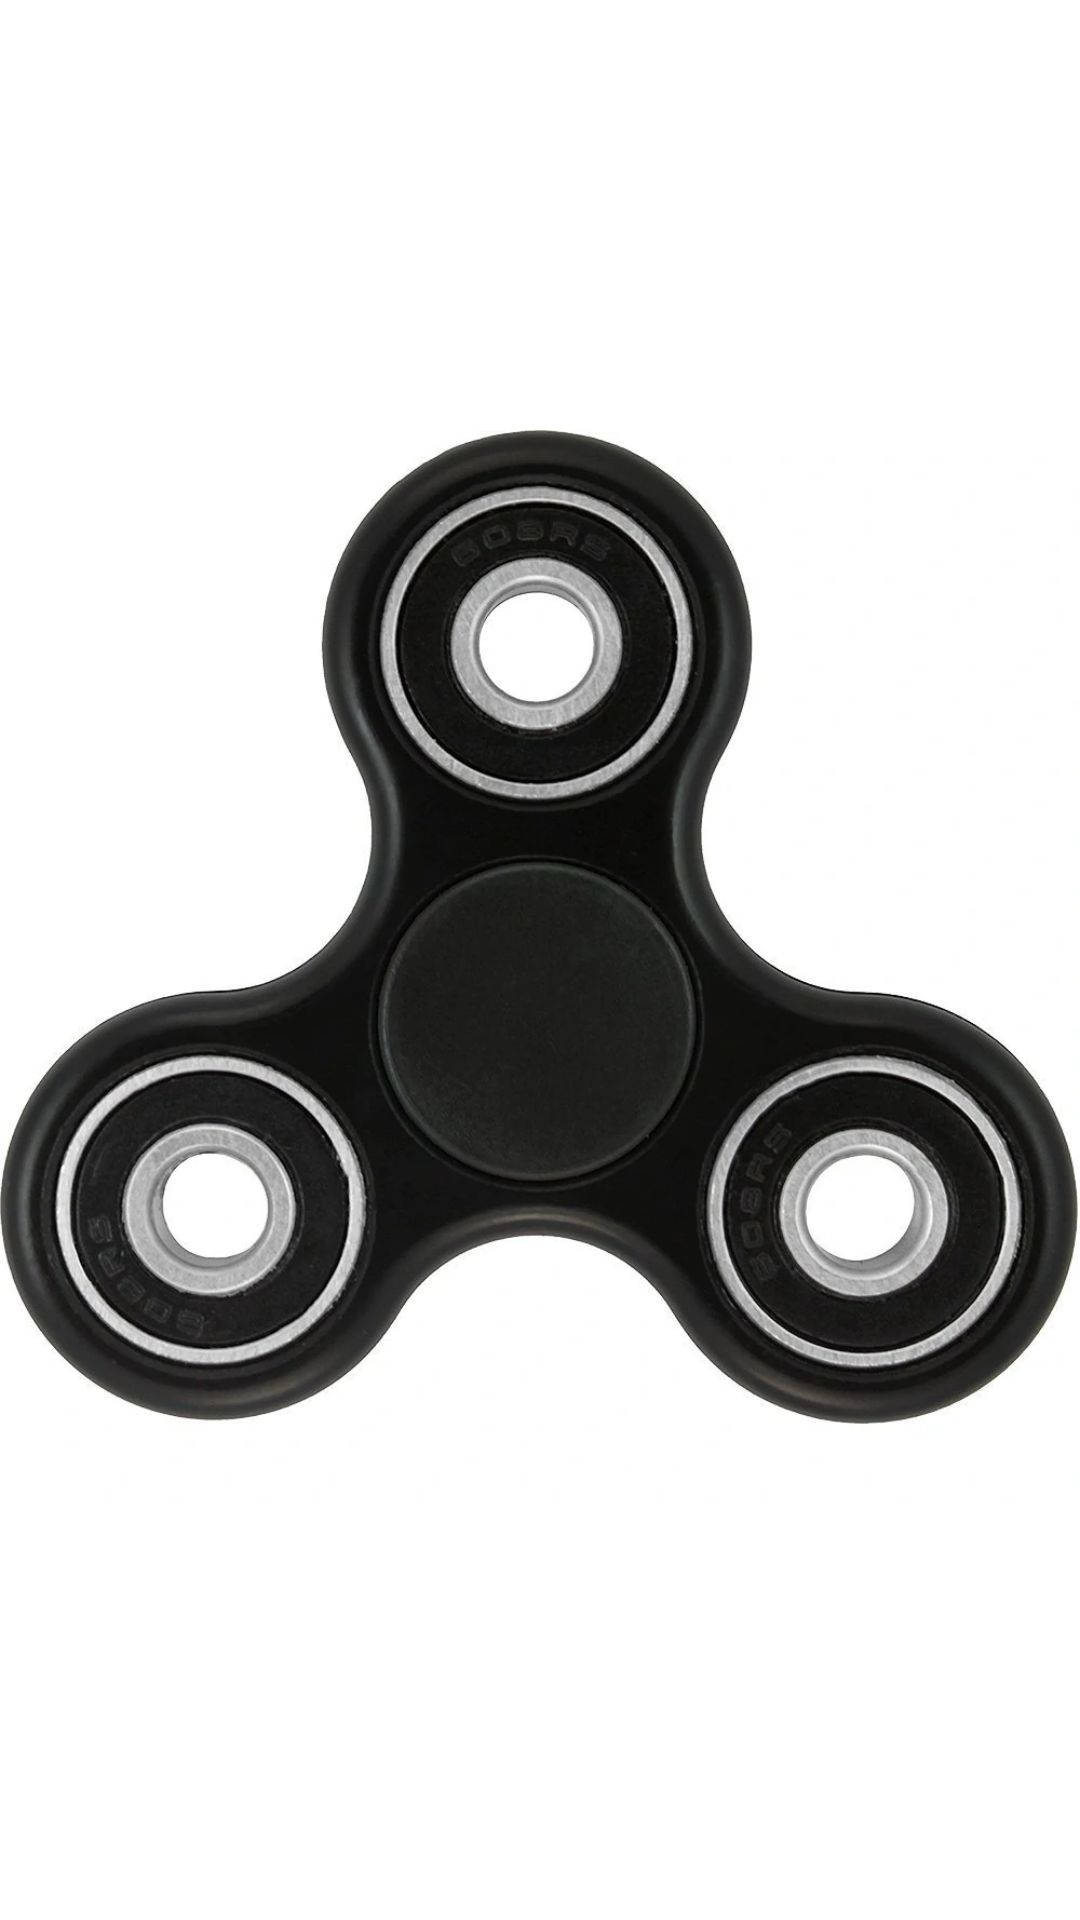 Relaxing with a Black Fidget Toy Wallpaper